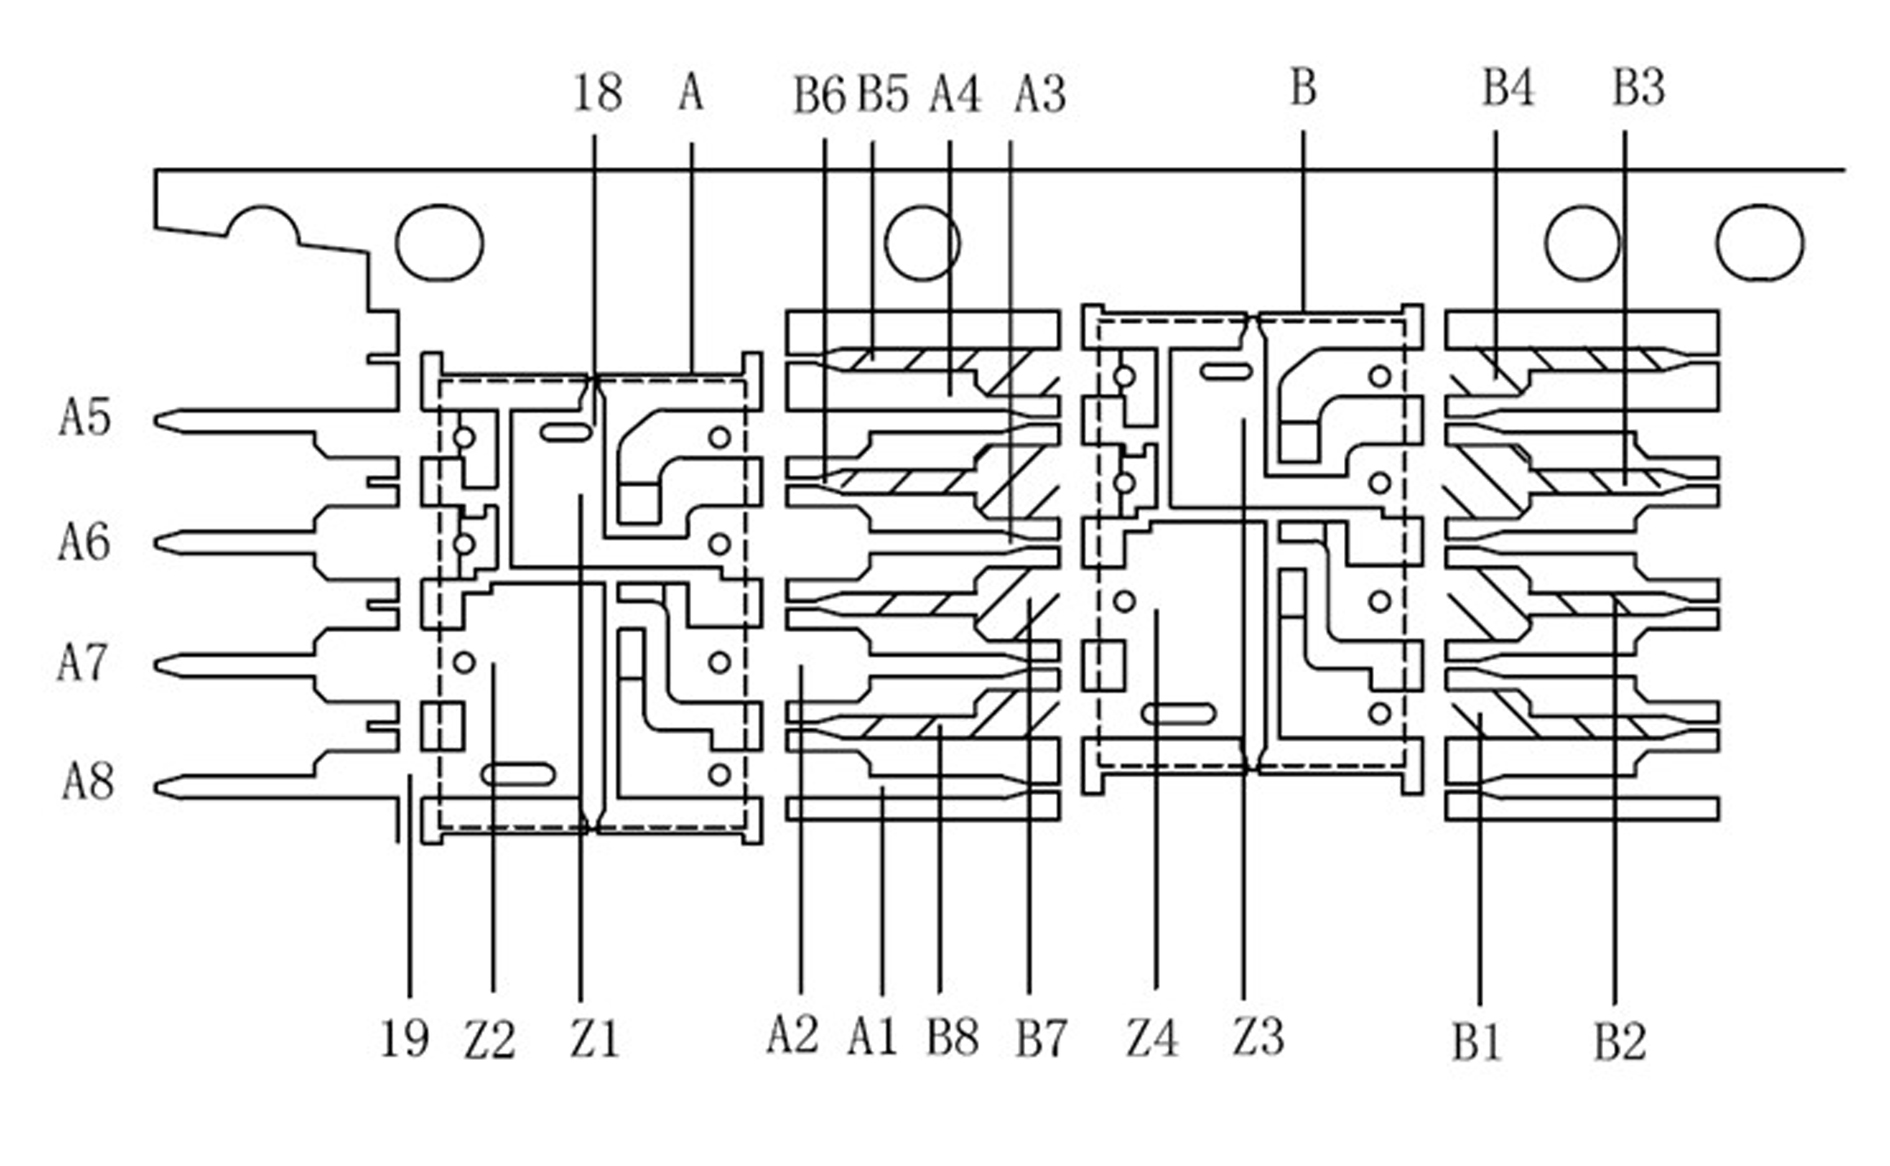 Matrix dual in-line package (DIP) lead frame, integrated circuit (IC) packages based on frame and production method of IC packages